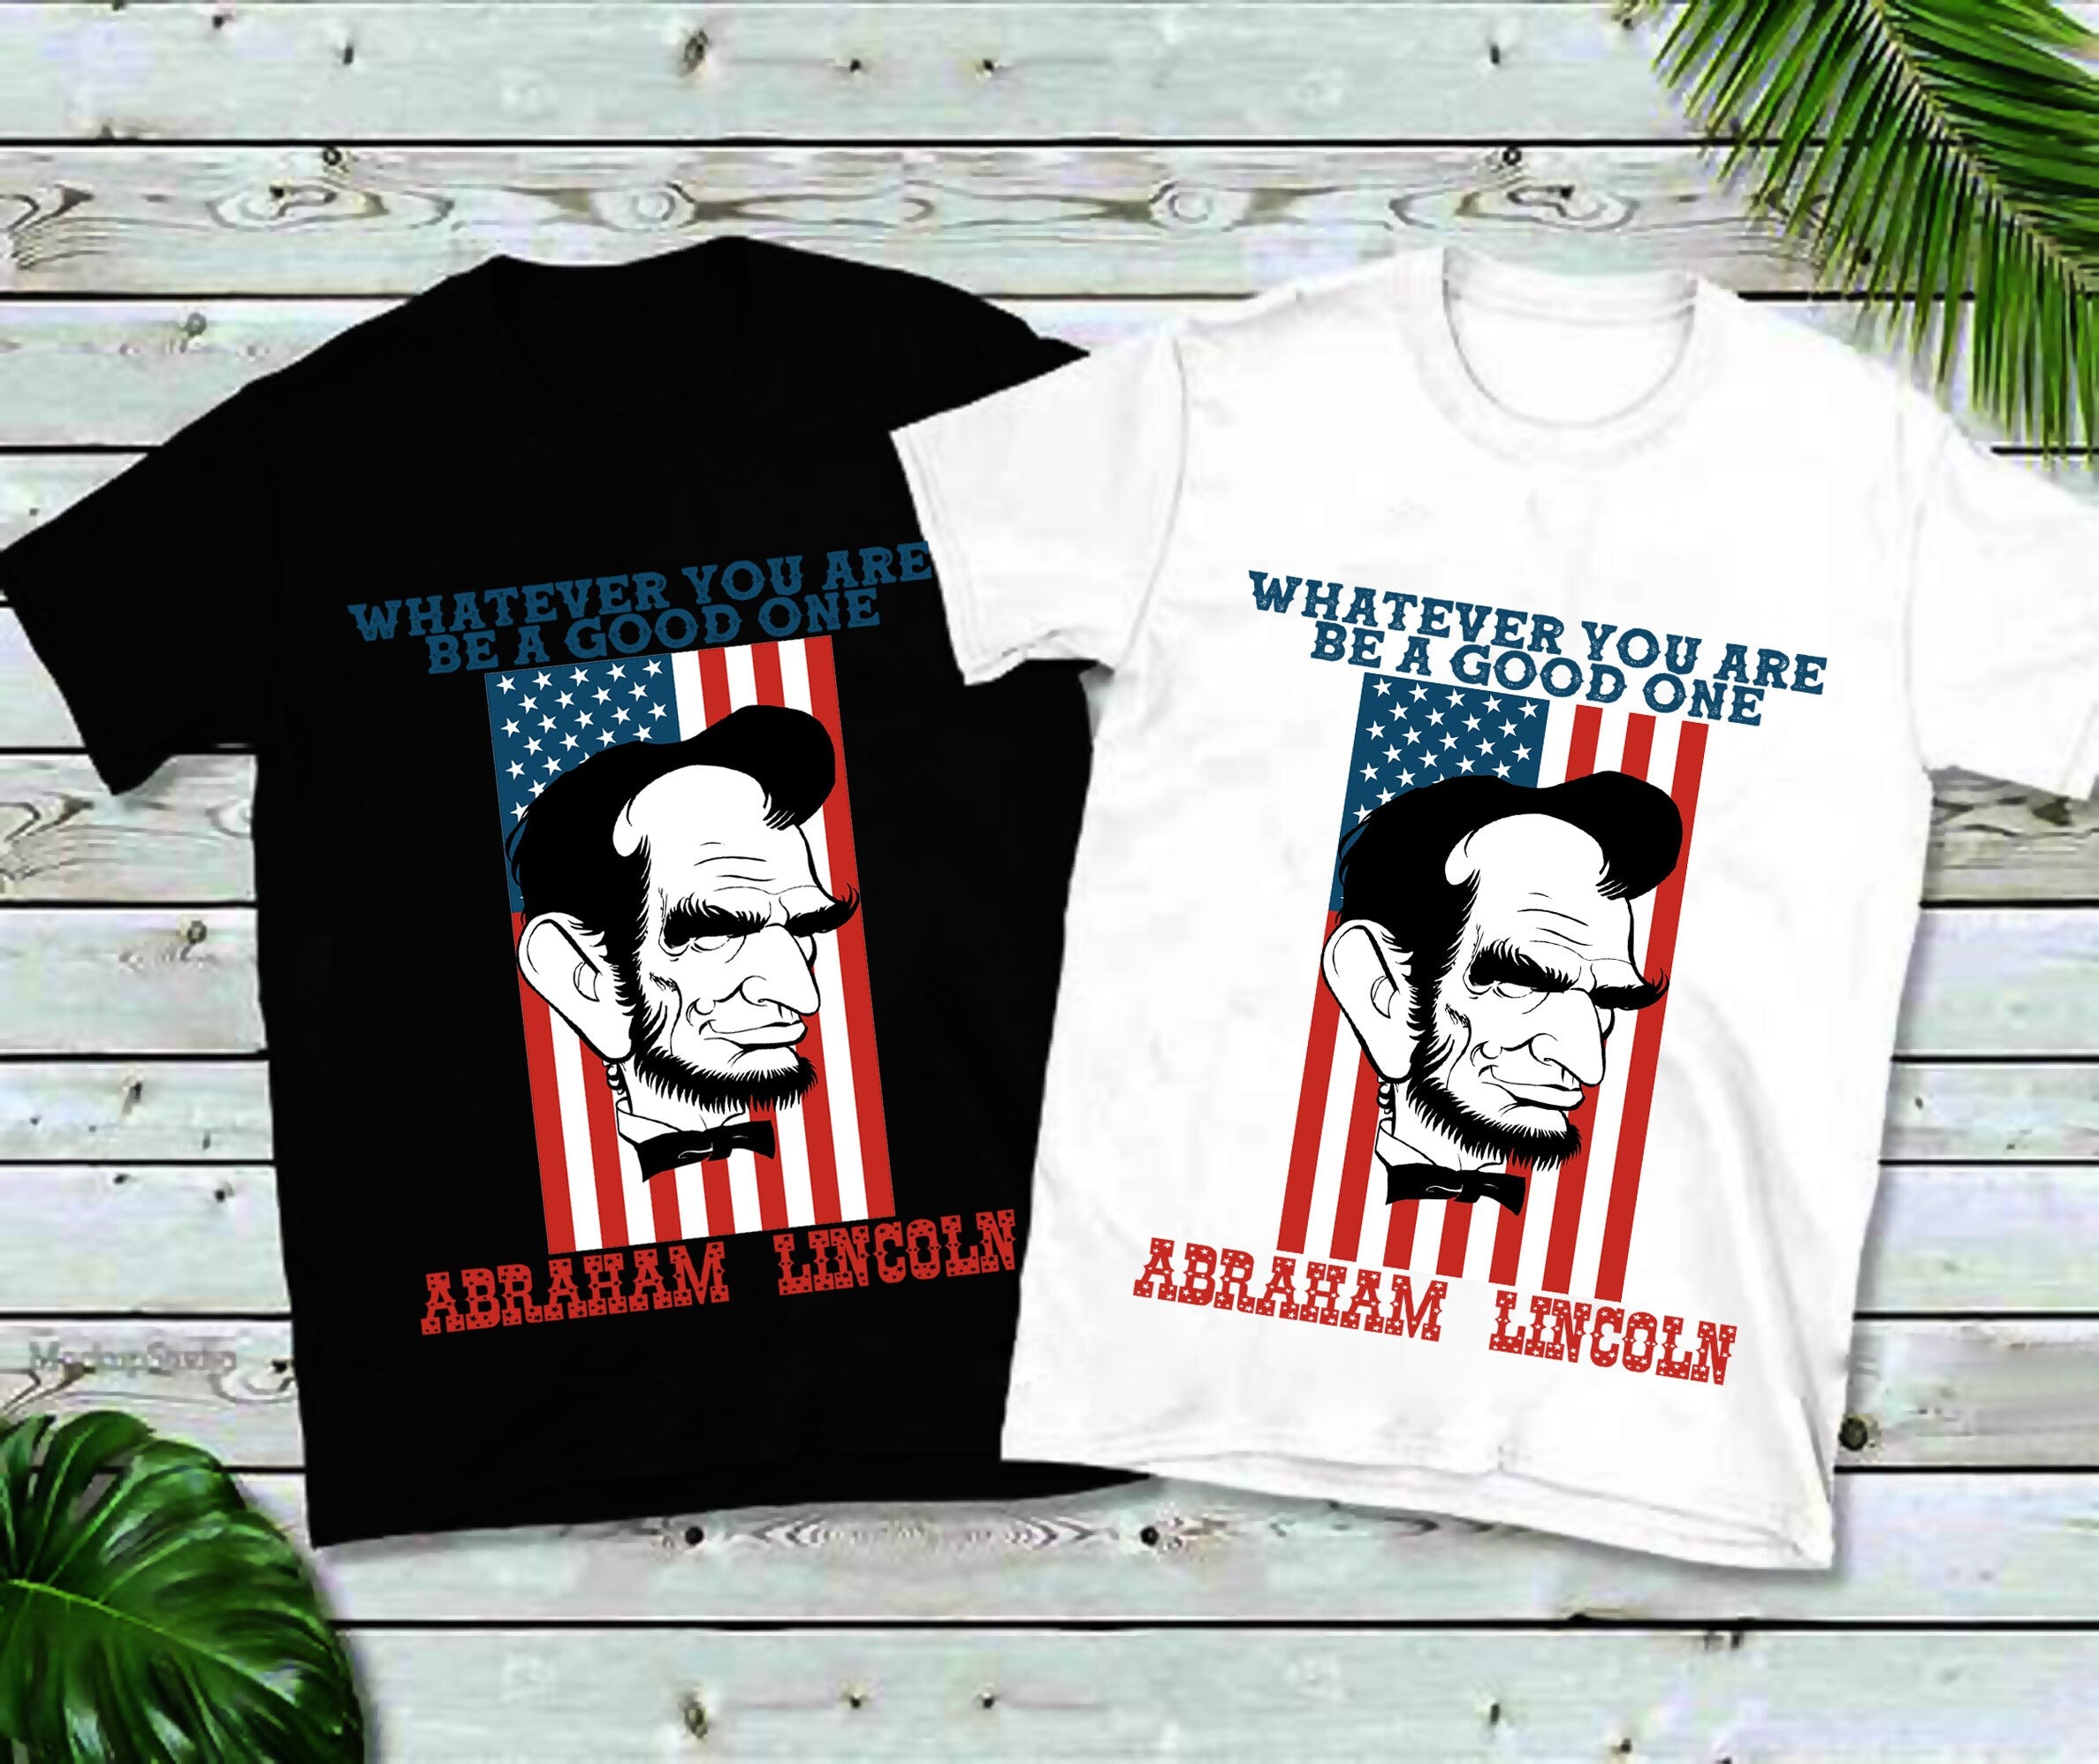 Whatever You Are Be A Good One, Abraham Lincoln T-Shirts, America Shirt, America, Tee 4th of July, Unisex Size, USA, Abe Lincoln, Patriotic - plusminusco.com